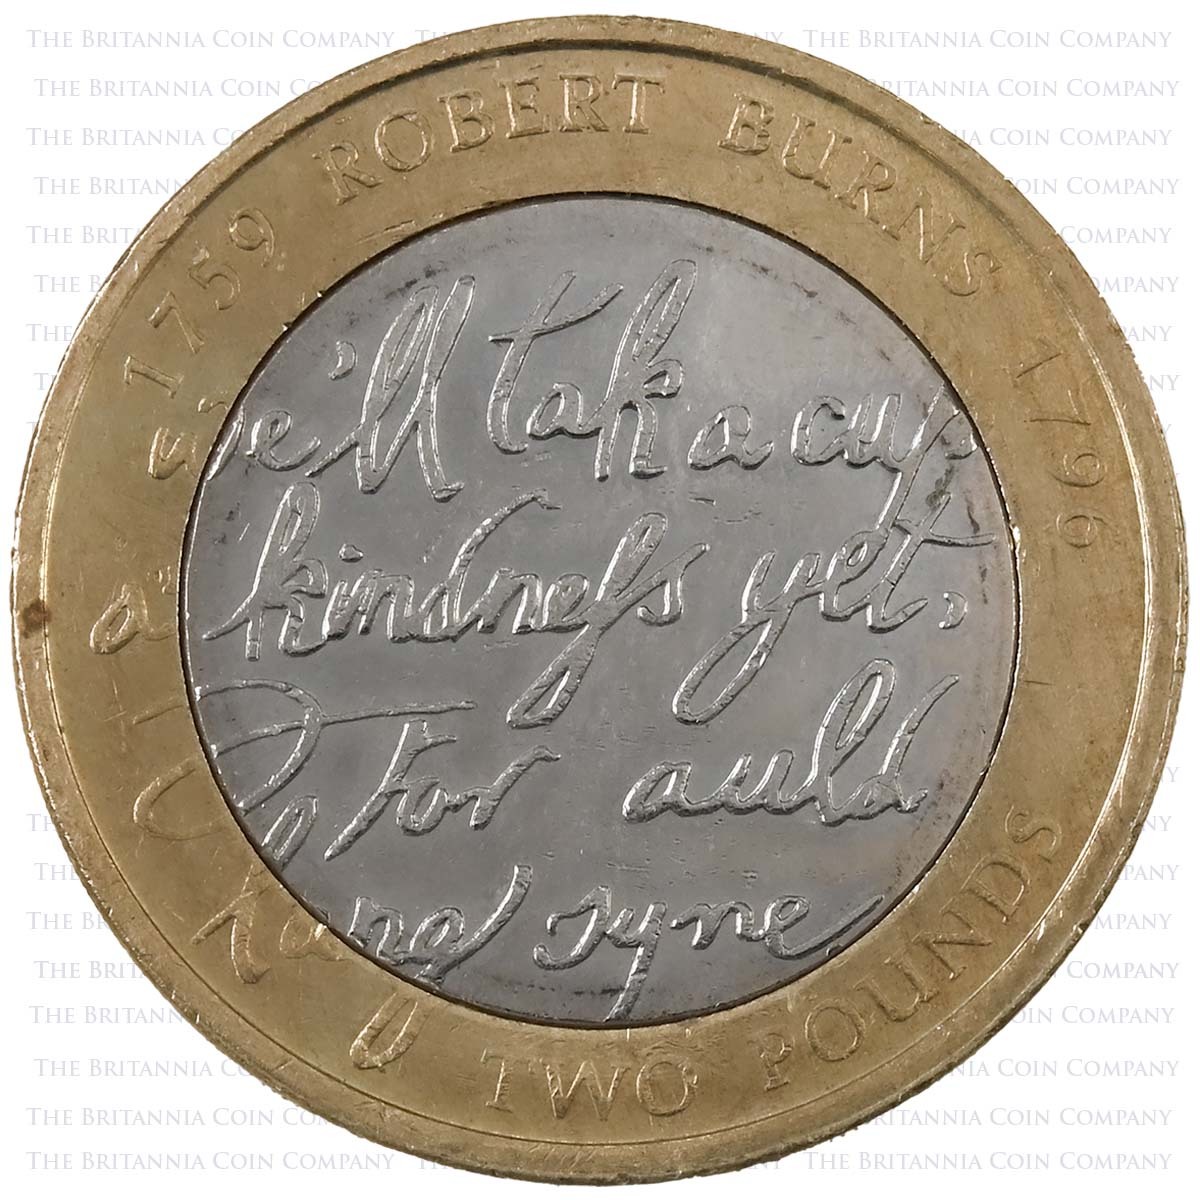 2009 Robert Burns Circulated Two Pound Coin Reverse